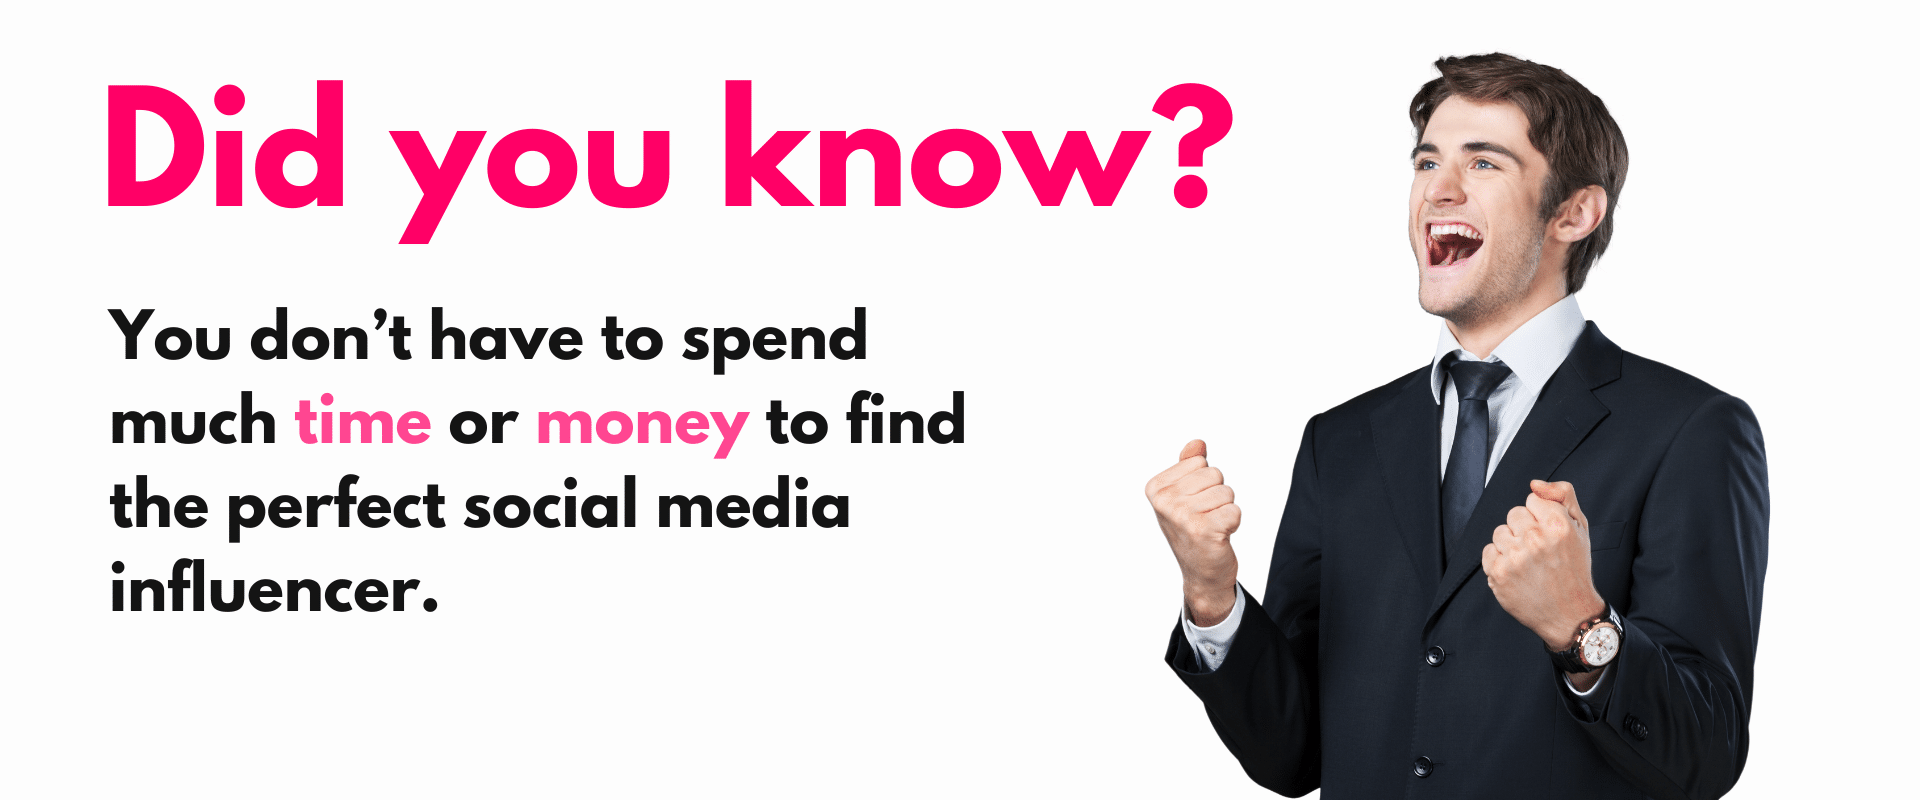 Did you know you don't have to spend much time or money to find the perfect social influencer?.